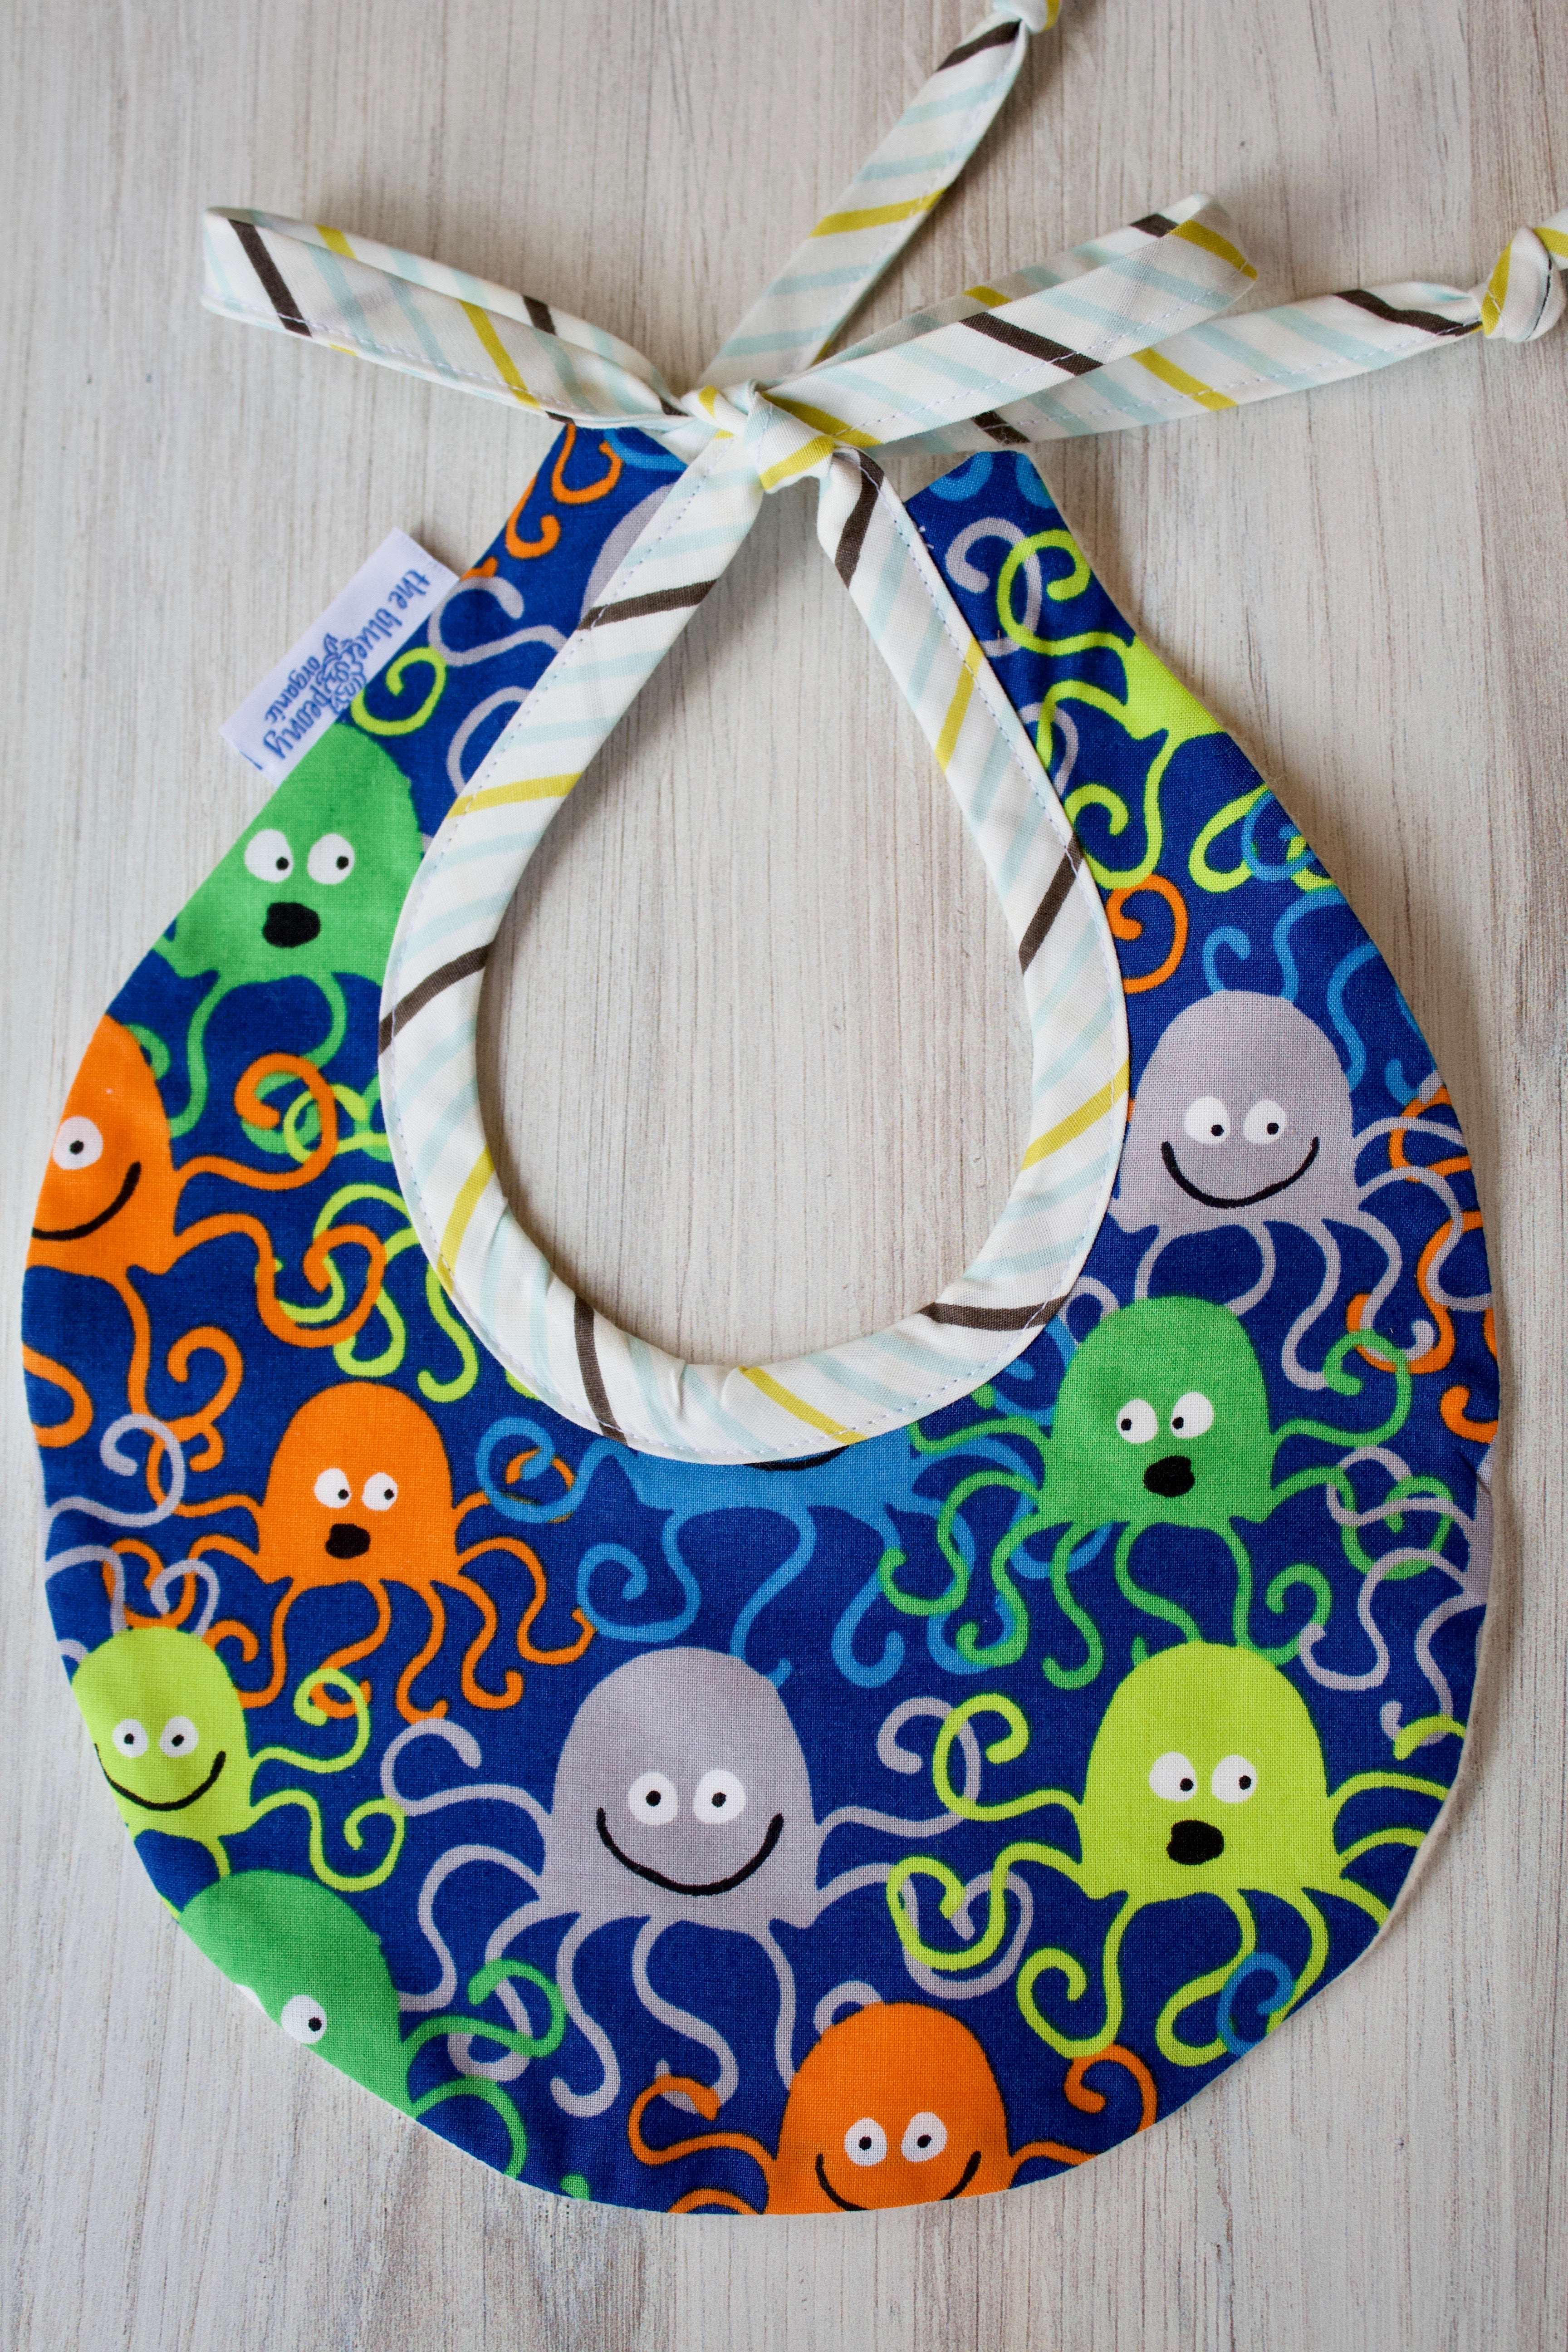 Brainy the Octopus Bib-The Blue Peony-Animal_Octopus,Category_Bib,Color_Blue,Color_Lime Green,Color_Orange,Department_Organic Baby,Material_Organic Cotton,Pattern_Ed Emberley's Animals,Theme_Animal,Theme_Water Life